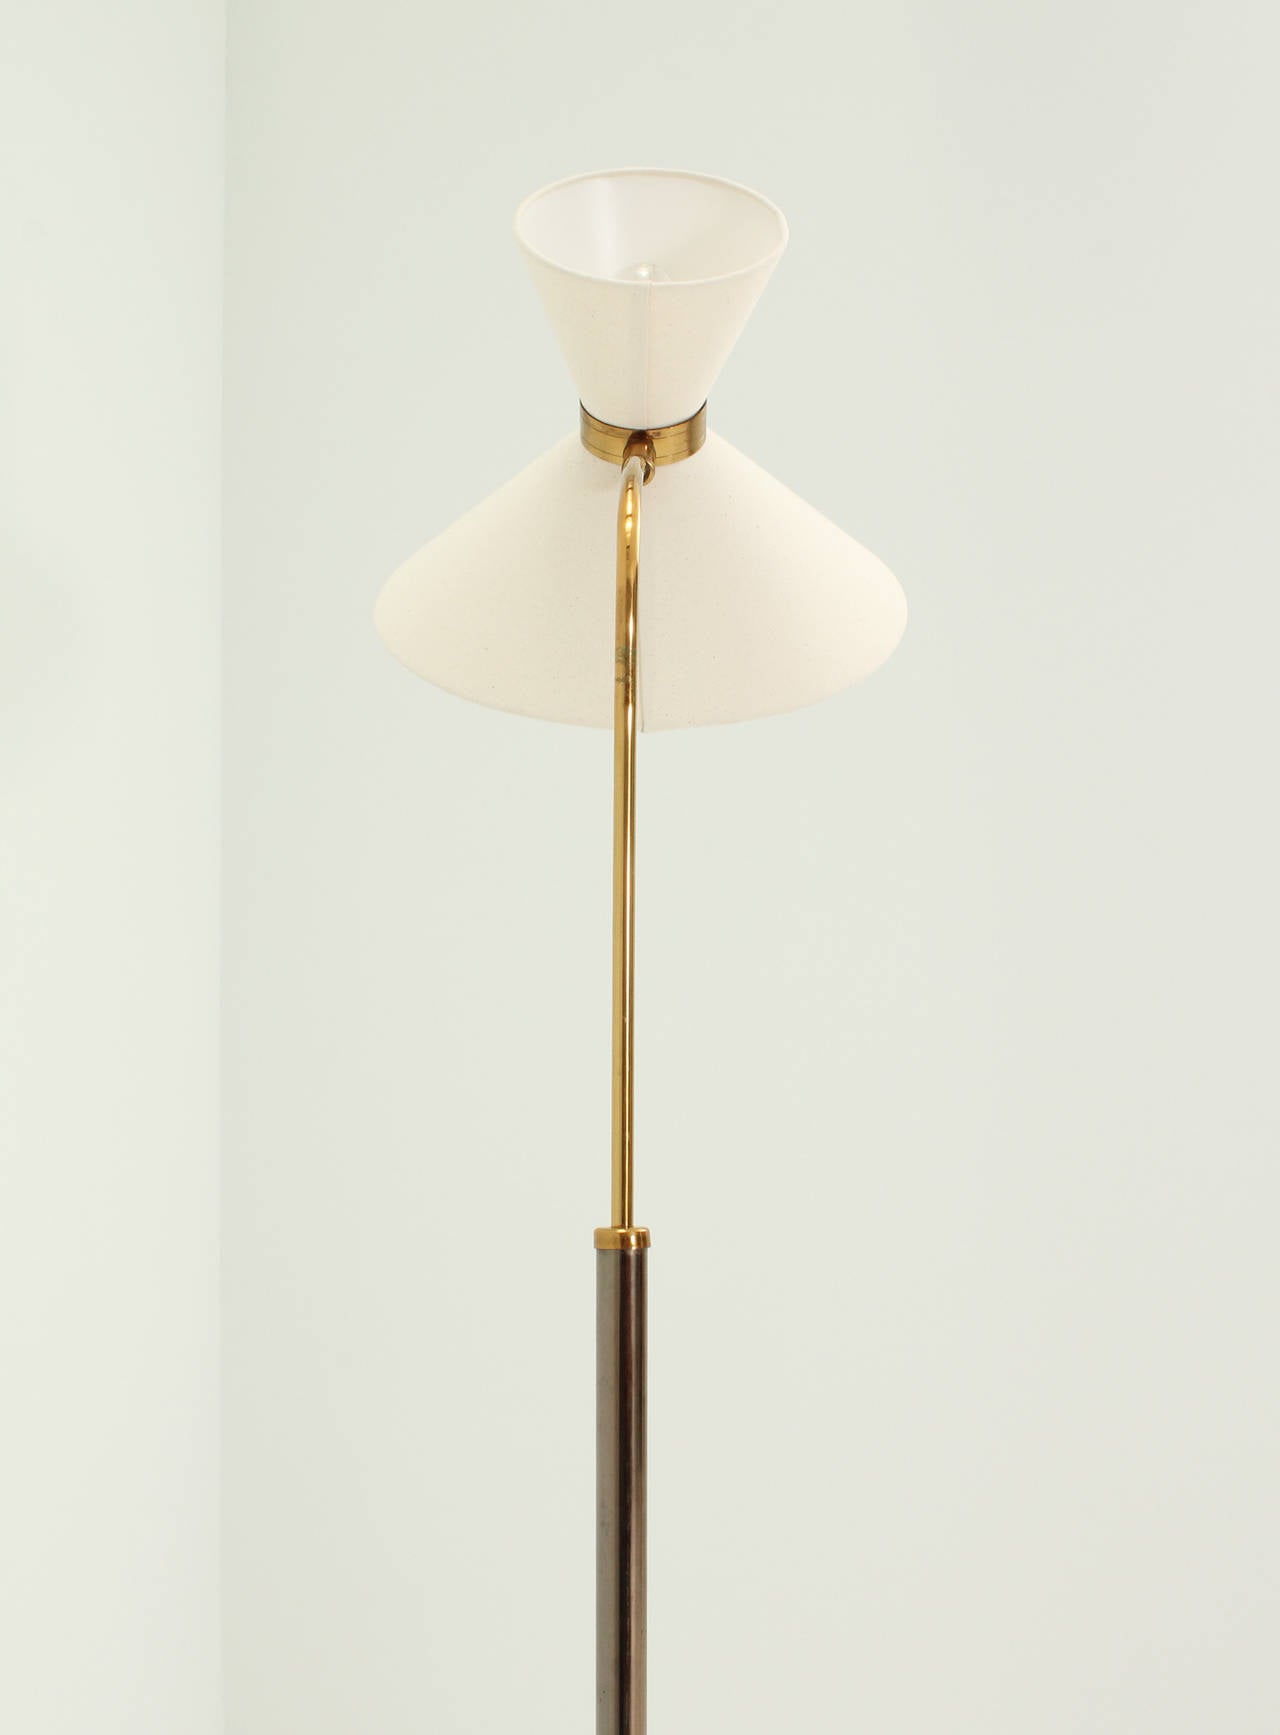 Mid-20th Century Floor Lamp by Lunel, 1950s